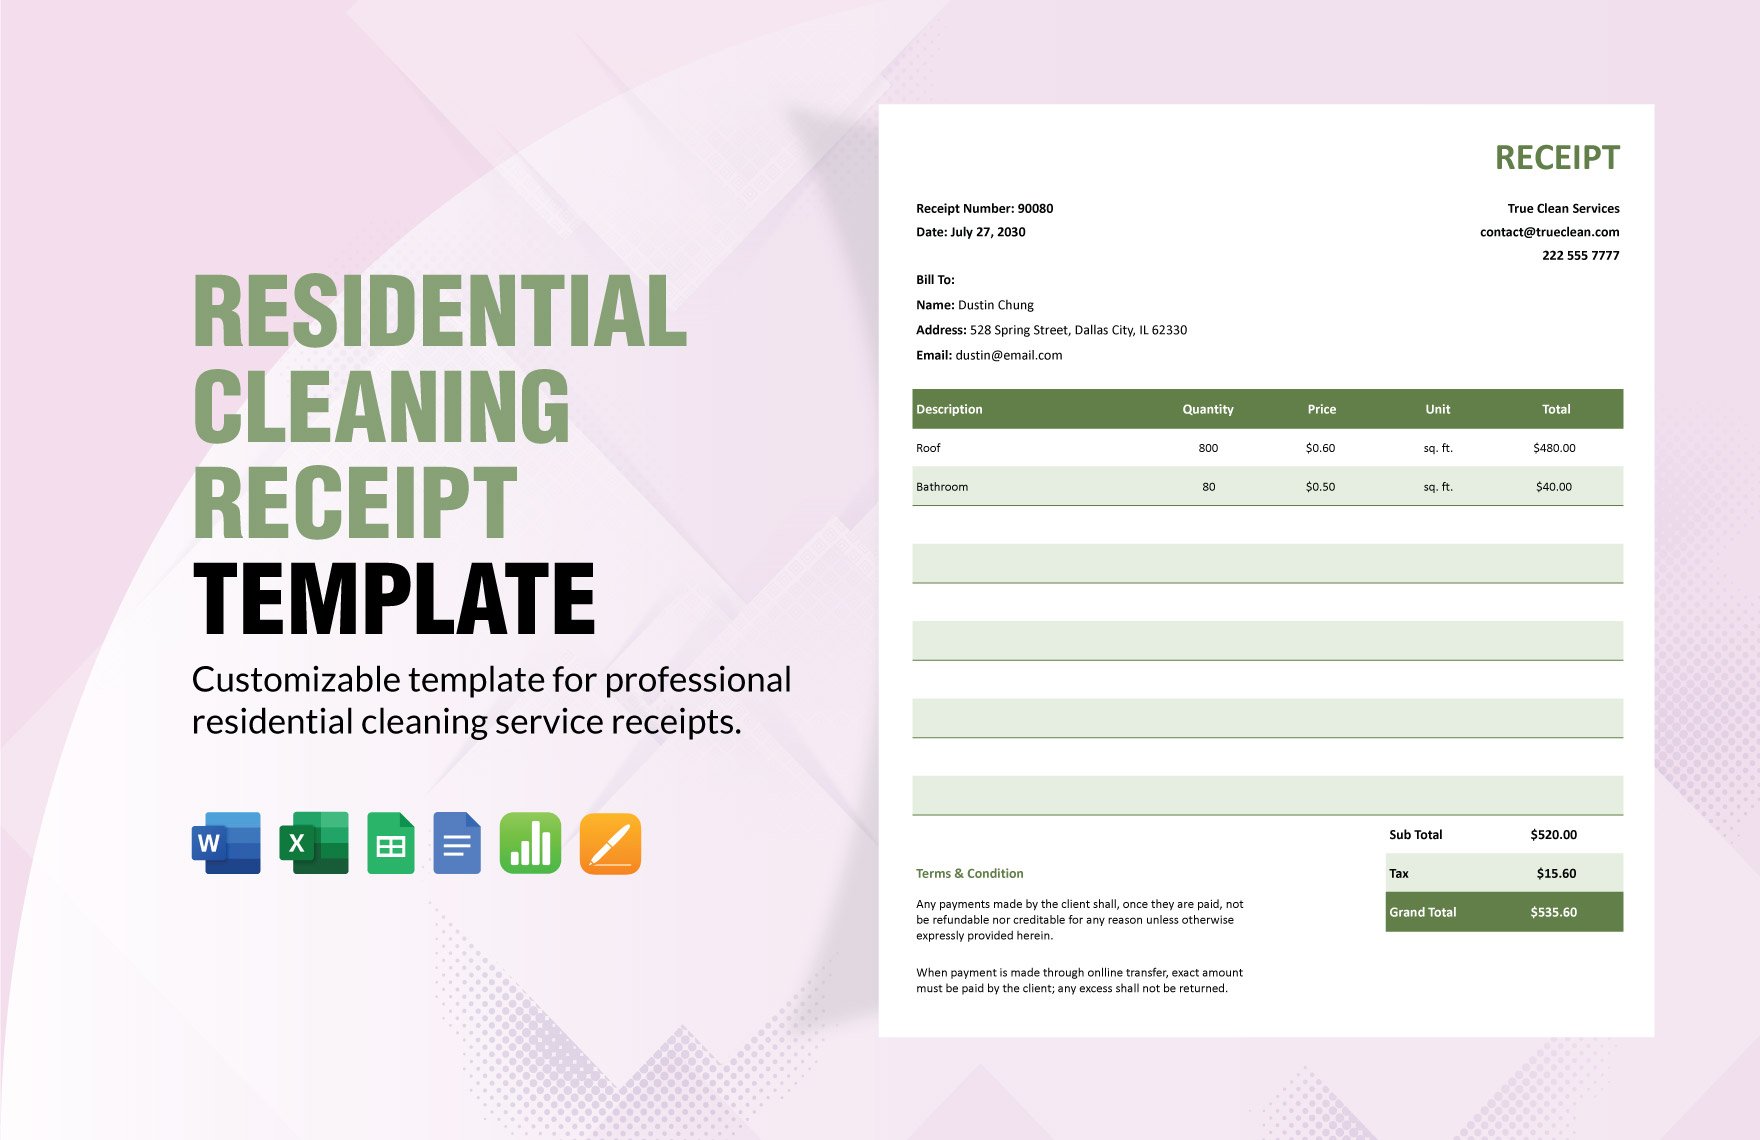 Residential Cleaning Receipt Template